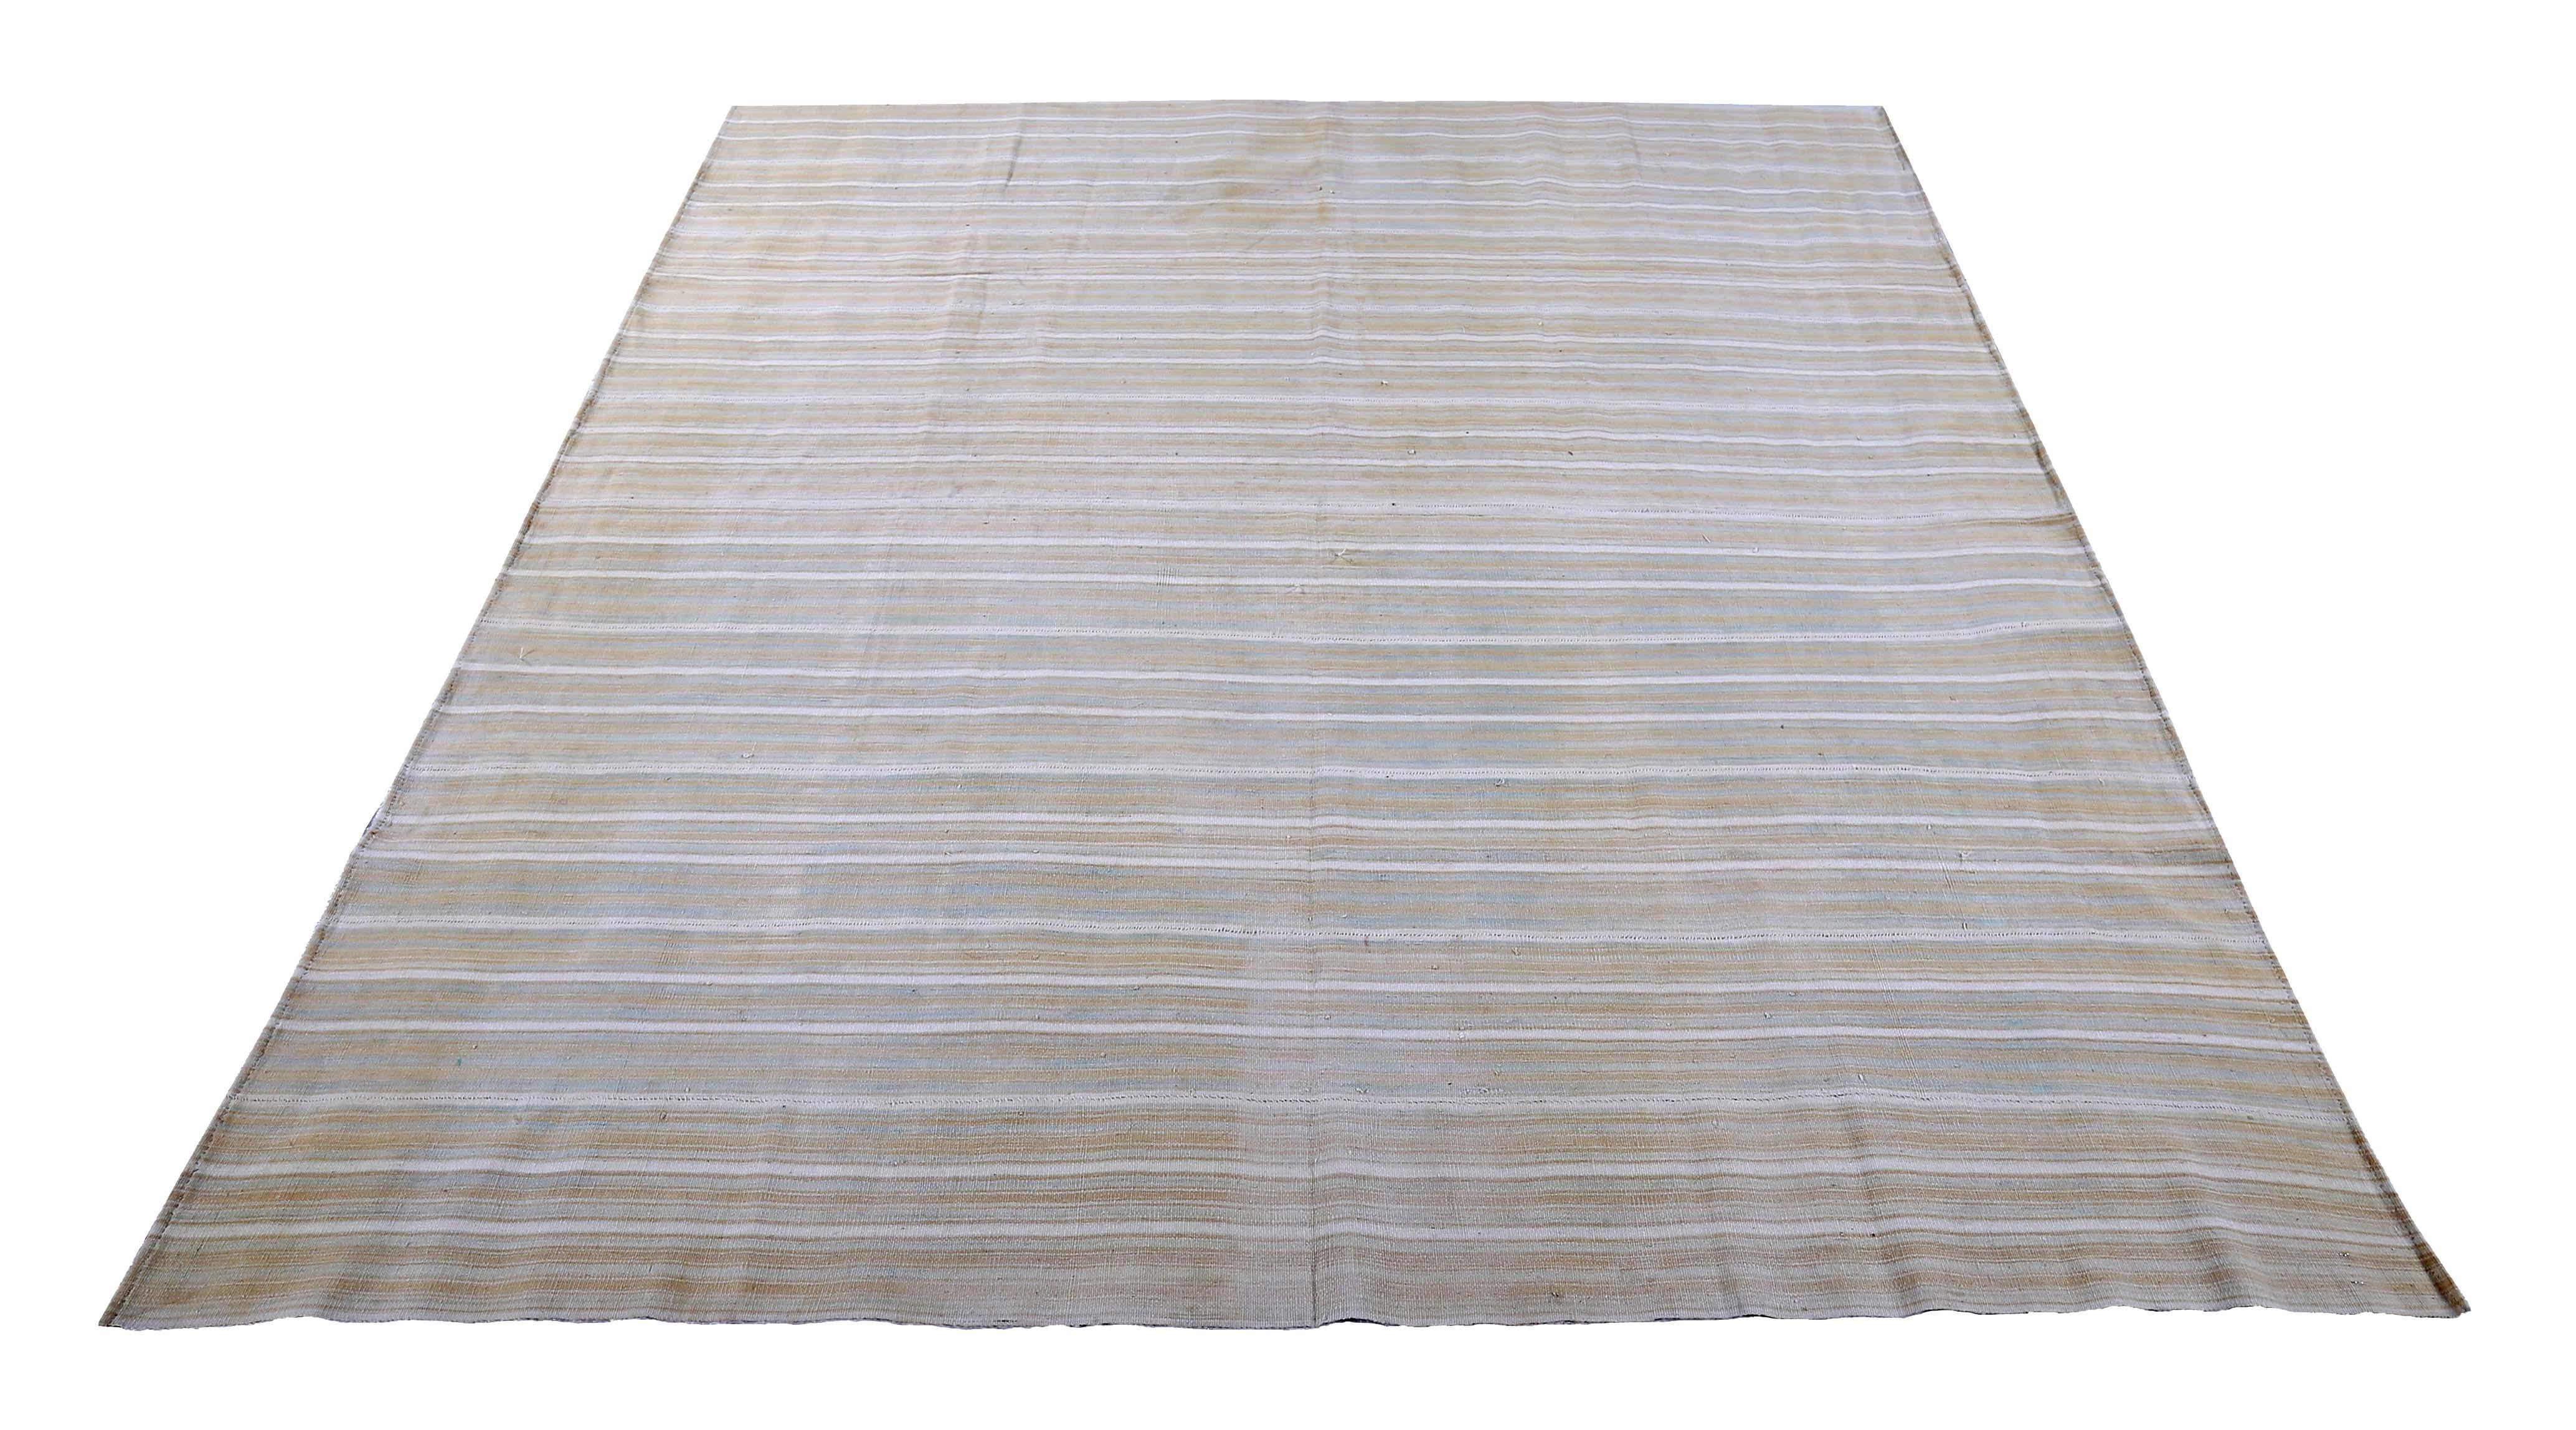 Turkish runner rug handwoven from the finest sheep’s wool and colored with all-natural vegetable dyes that are safe for humans and pets. It’s a traditional Kilim flat-weave design featuring gray and beige stripes over an ivory field. It’s a stunning